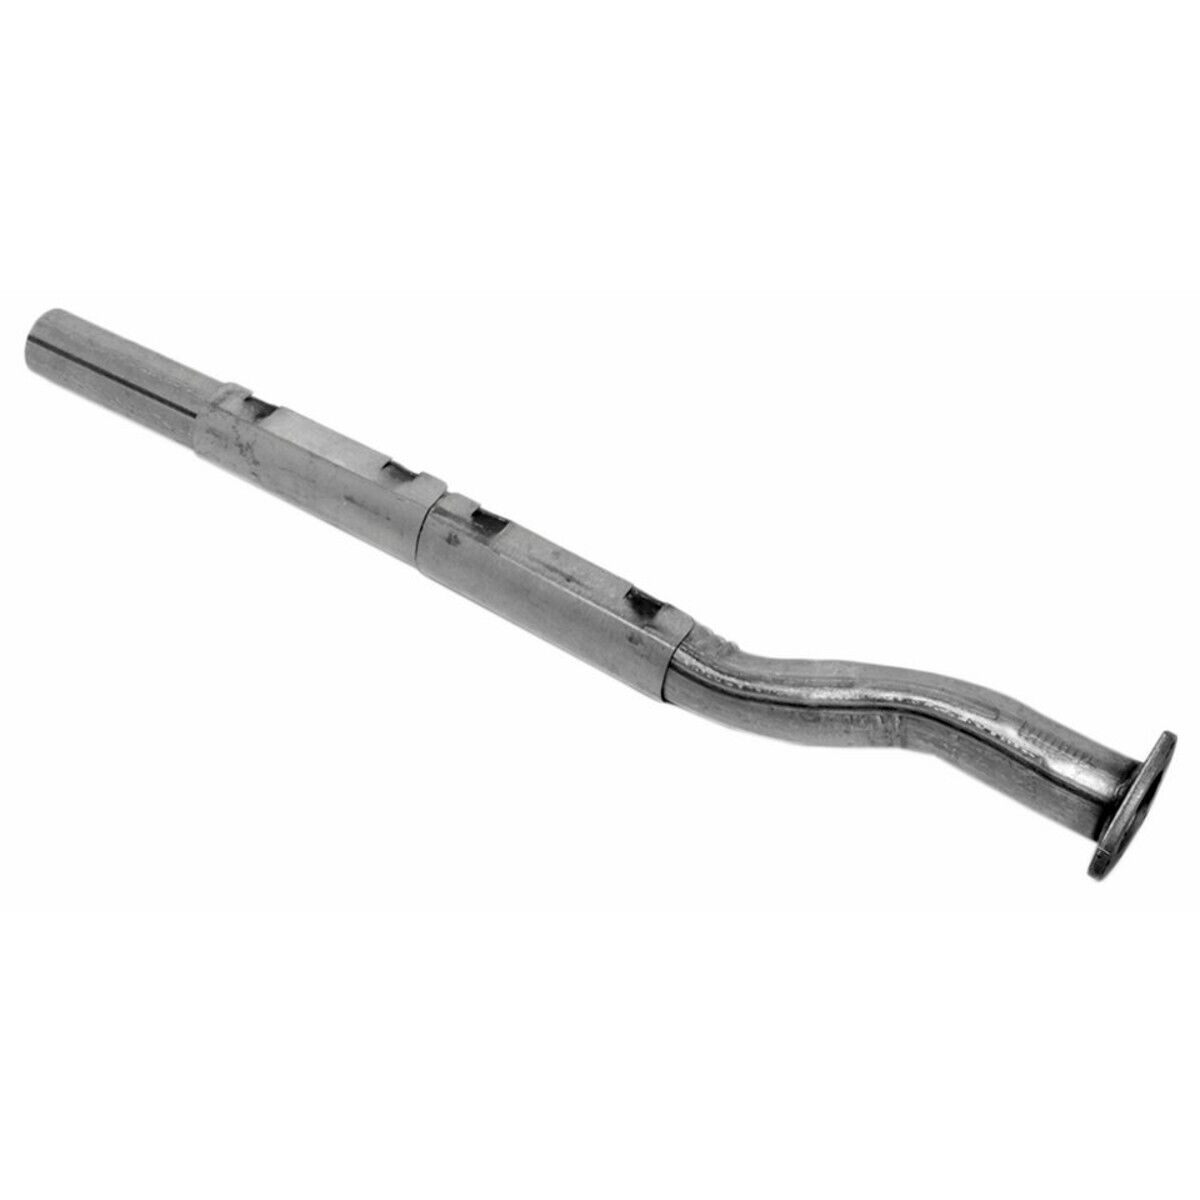 53116 Walker Exhaust Pipe for Chevy S10 Pickup Chevrolet S-10 GMC Sonoma Hombre